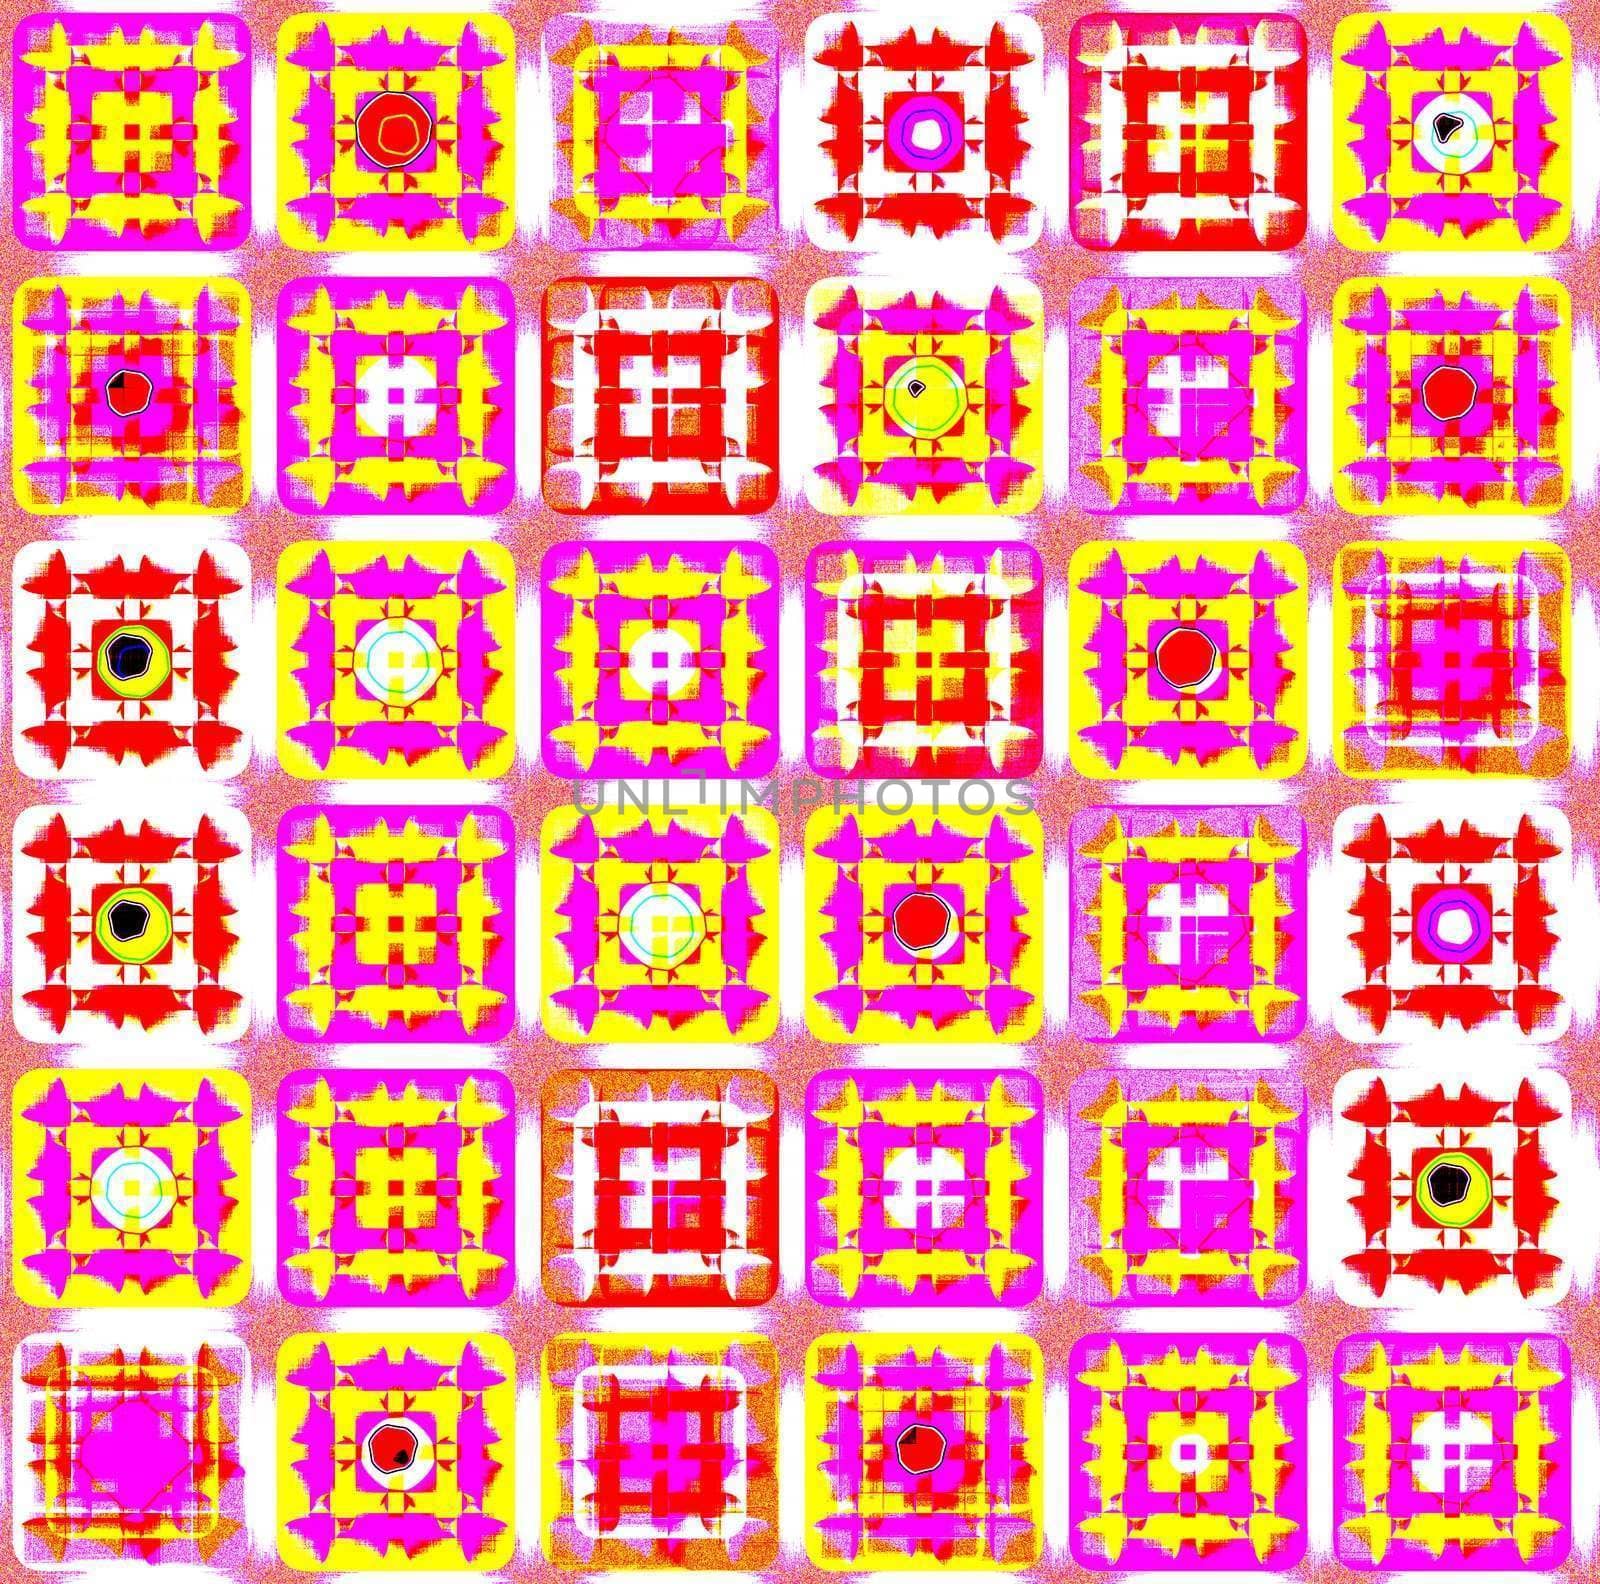 grunge texture of squares in pink, red and yellow